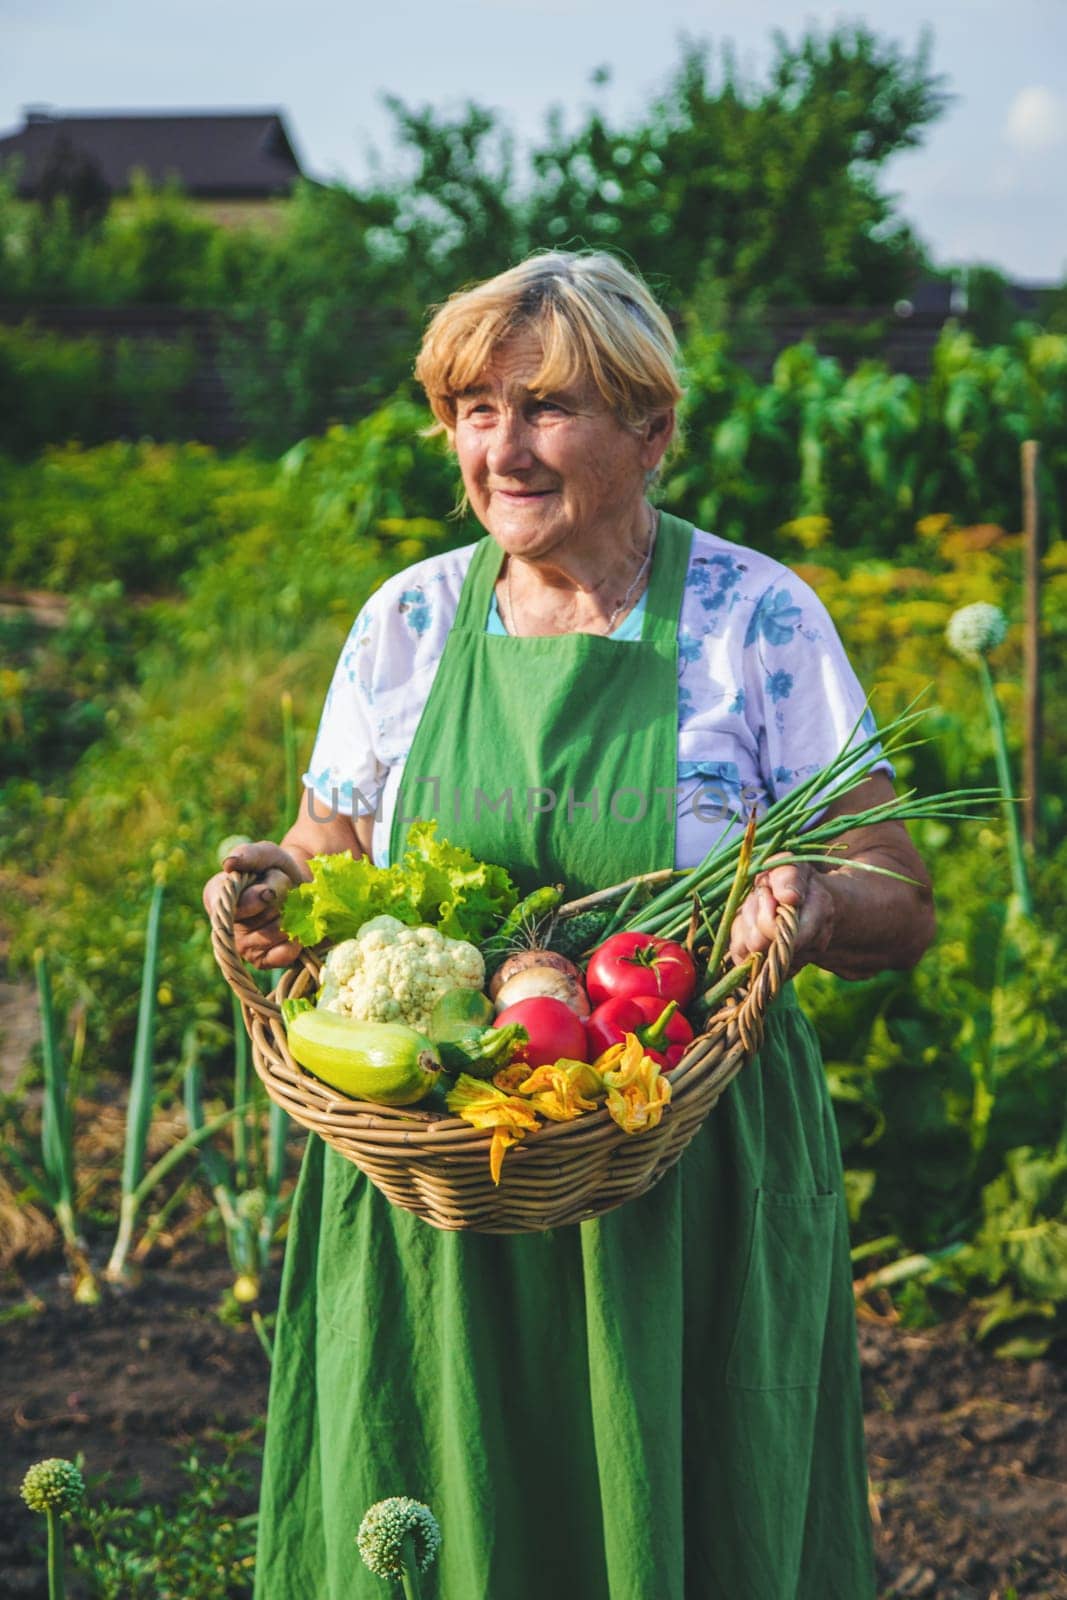 An old woman harvests vegetables in the garden. Selective focus. Food.